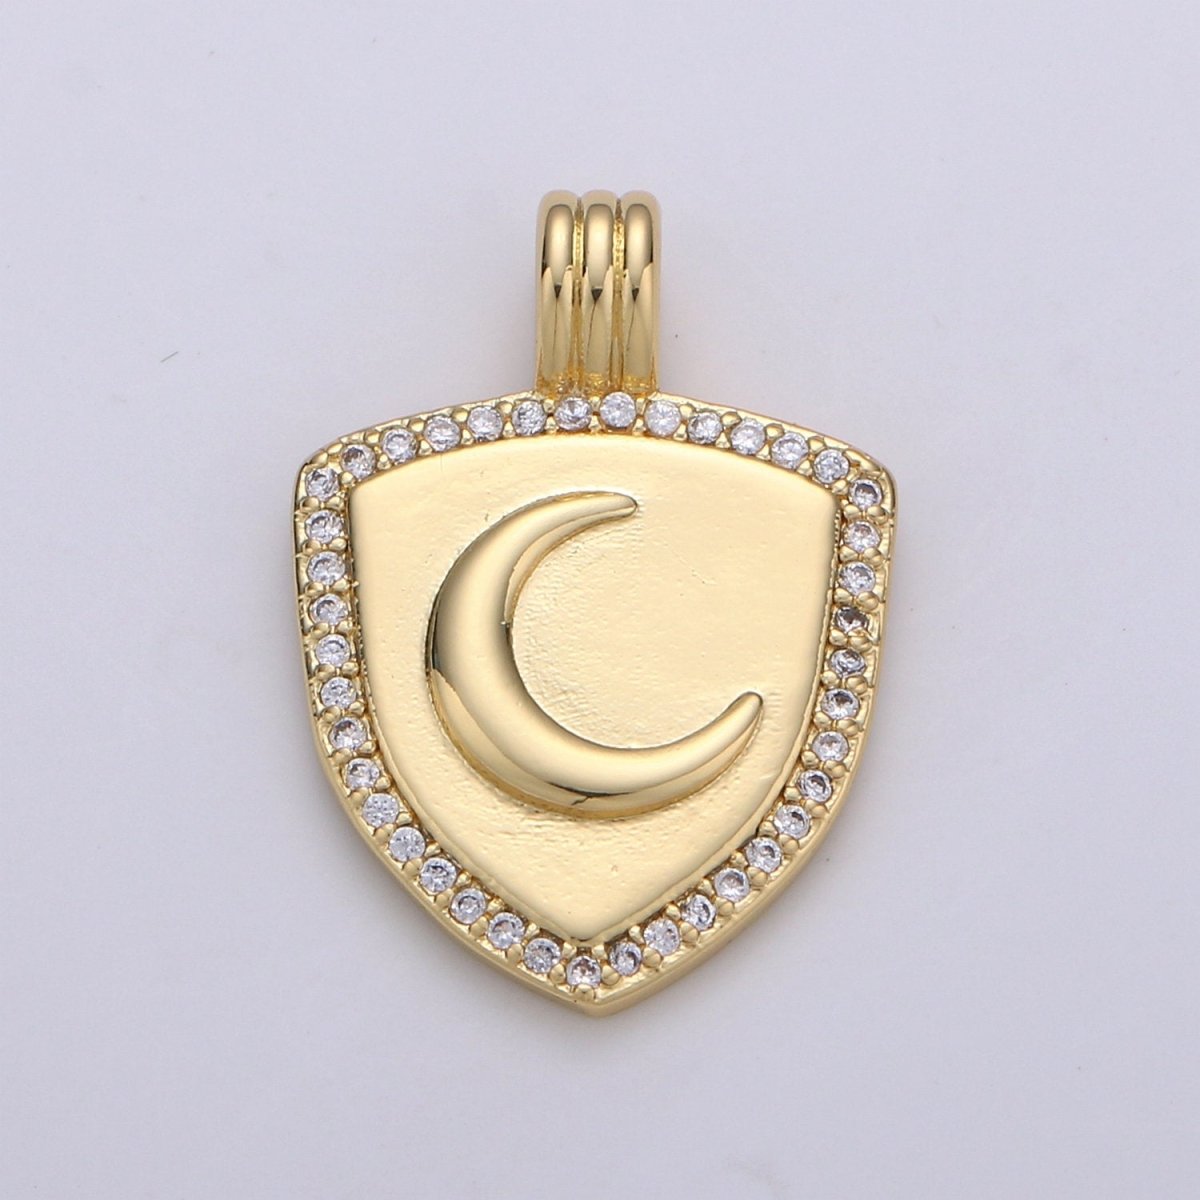 Dainty 14k Gold Filled Shield Charm, Cz Shield pendant, Micro Pave Moon Pendant Protection Jewelry Supply I-934 - DLUXCA